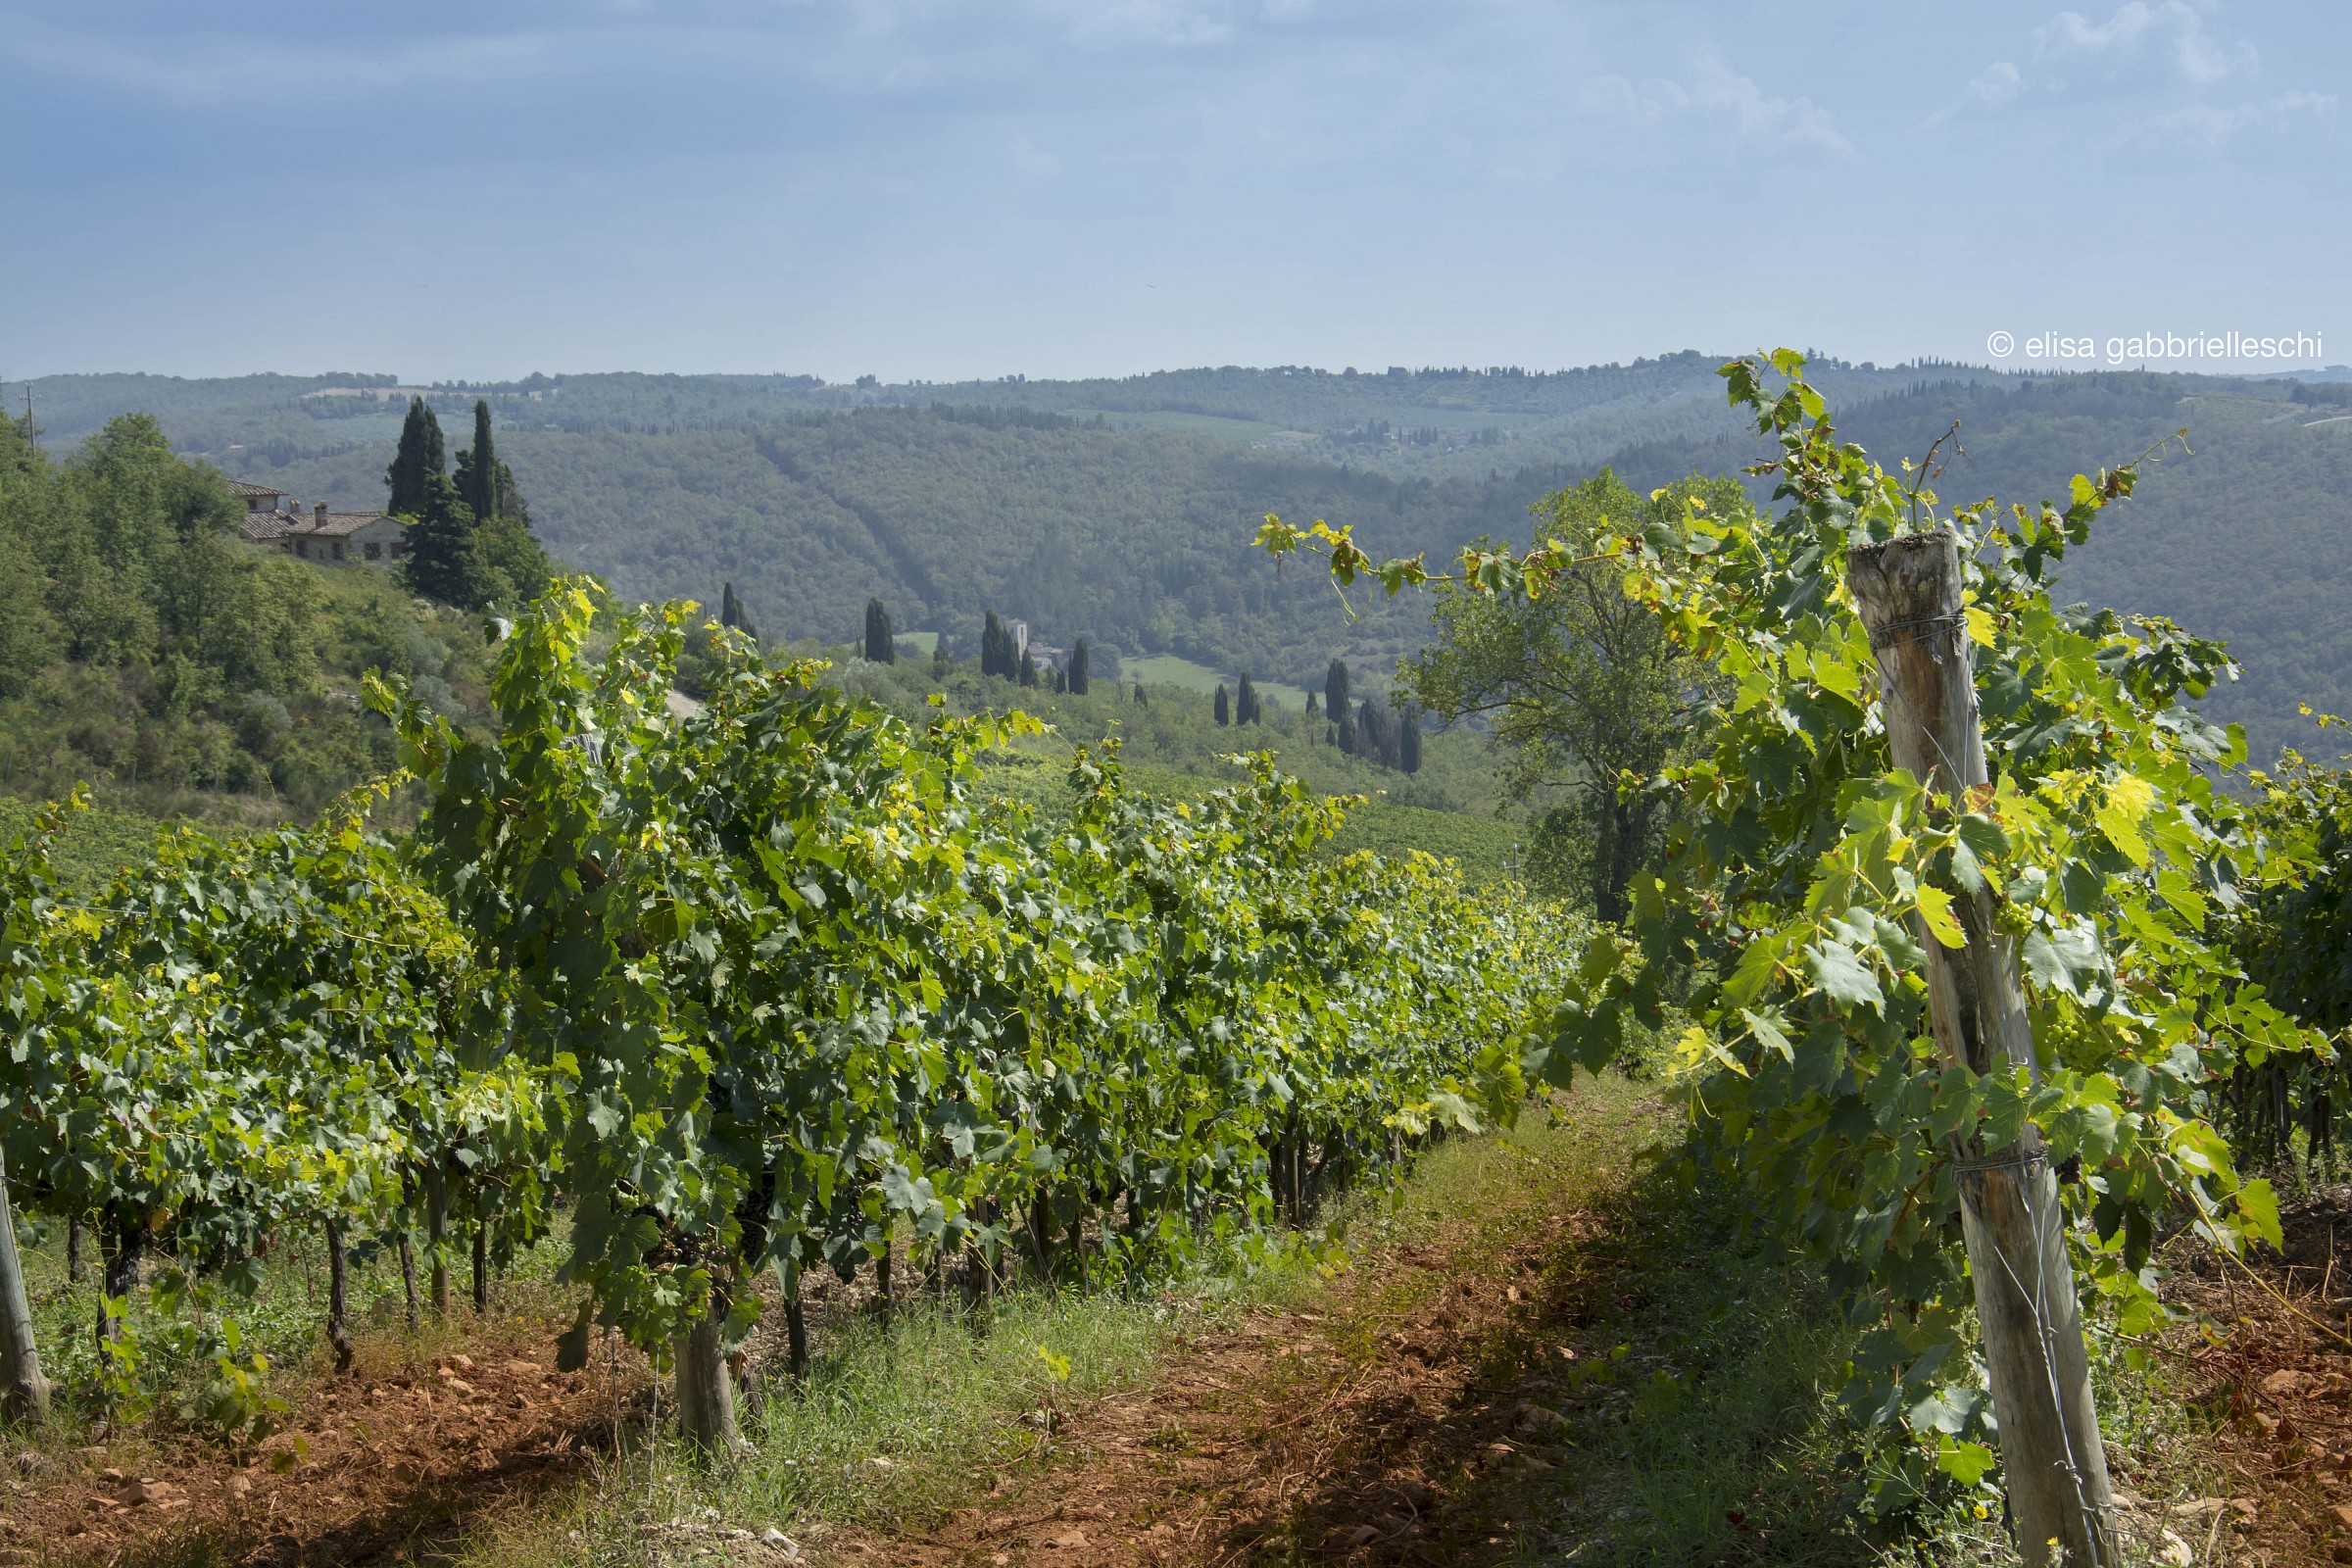 Bunch of grapes in Chianti, Tuscany...